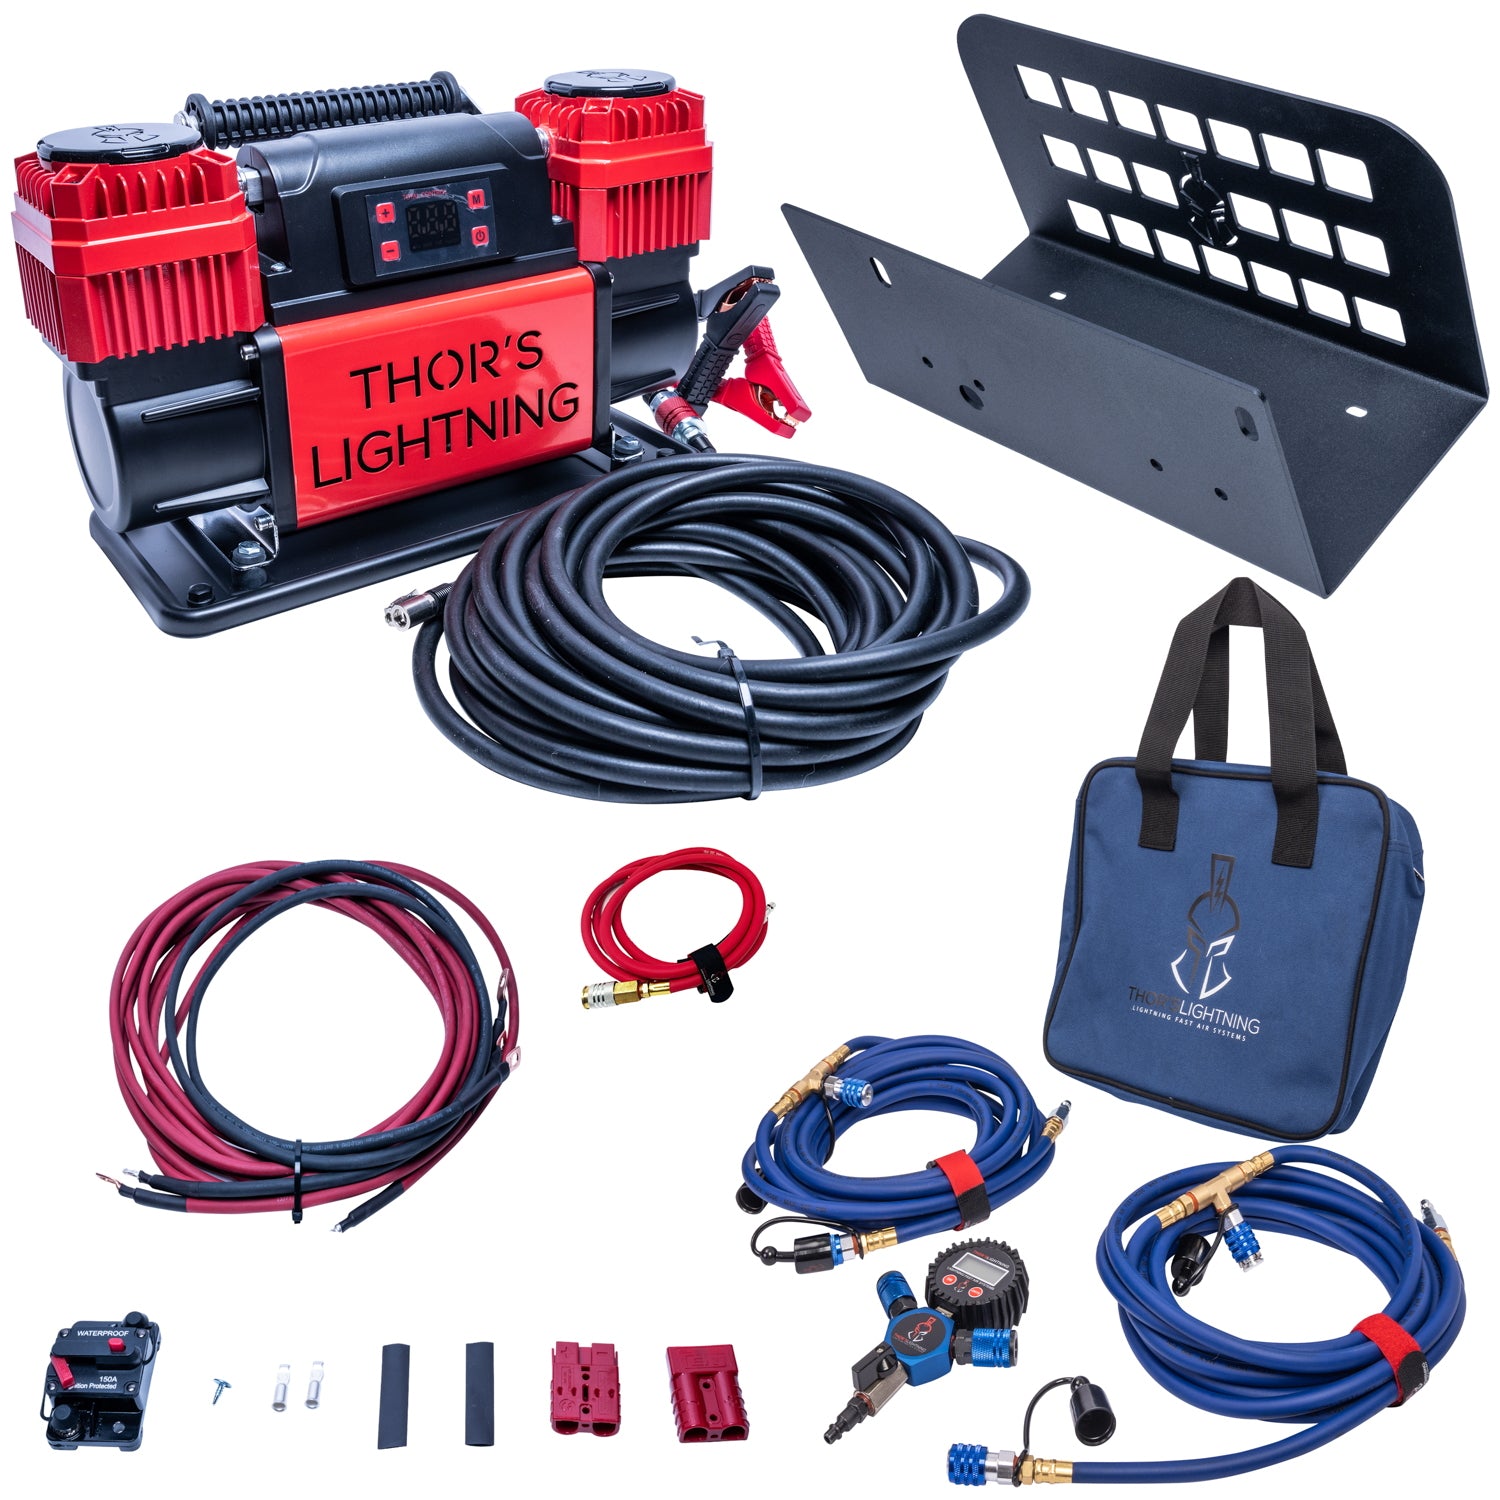 Thor's Lightning 12v True Dual TotalControl Portable Air Compressor Ultimate Setup Bundle for Can-Am and Polaris Side-by-Side